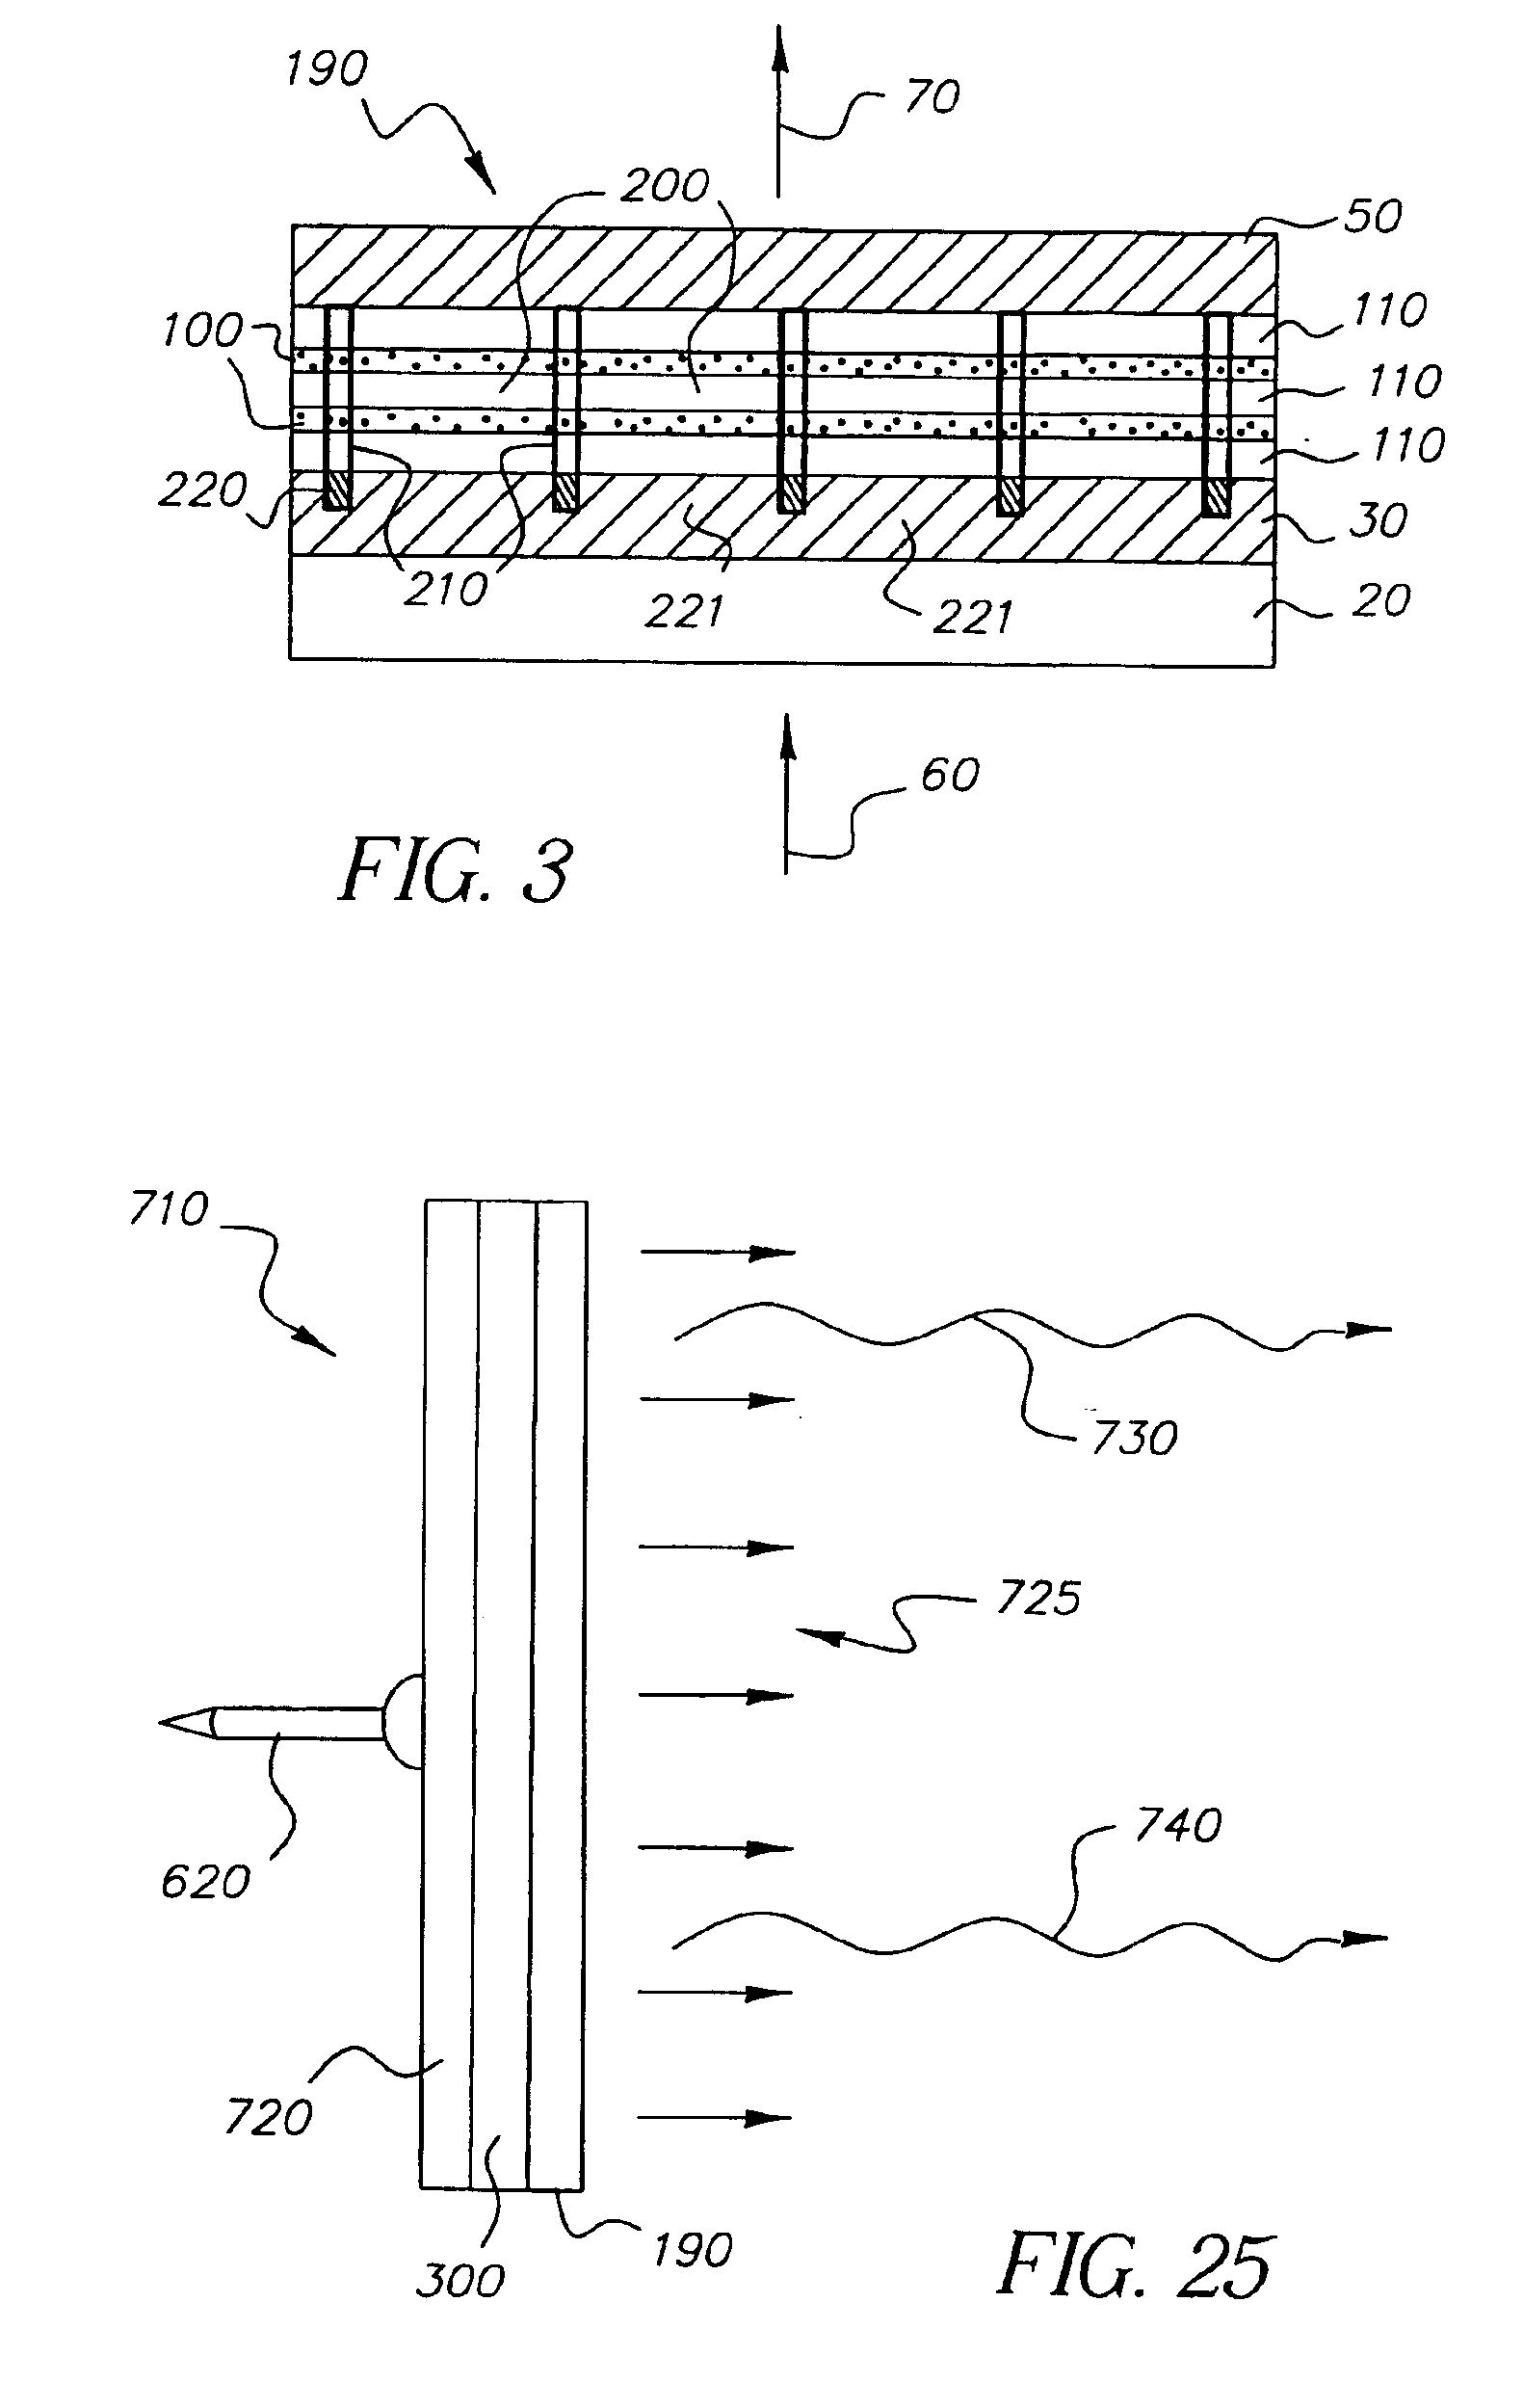 Organic laser cavity device having incoherent light as a pumping source